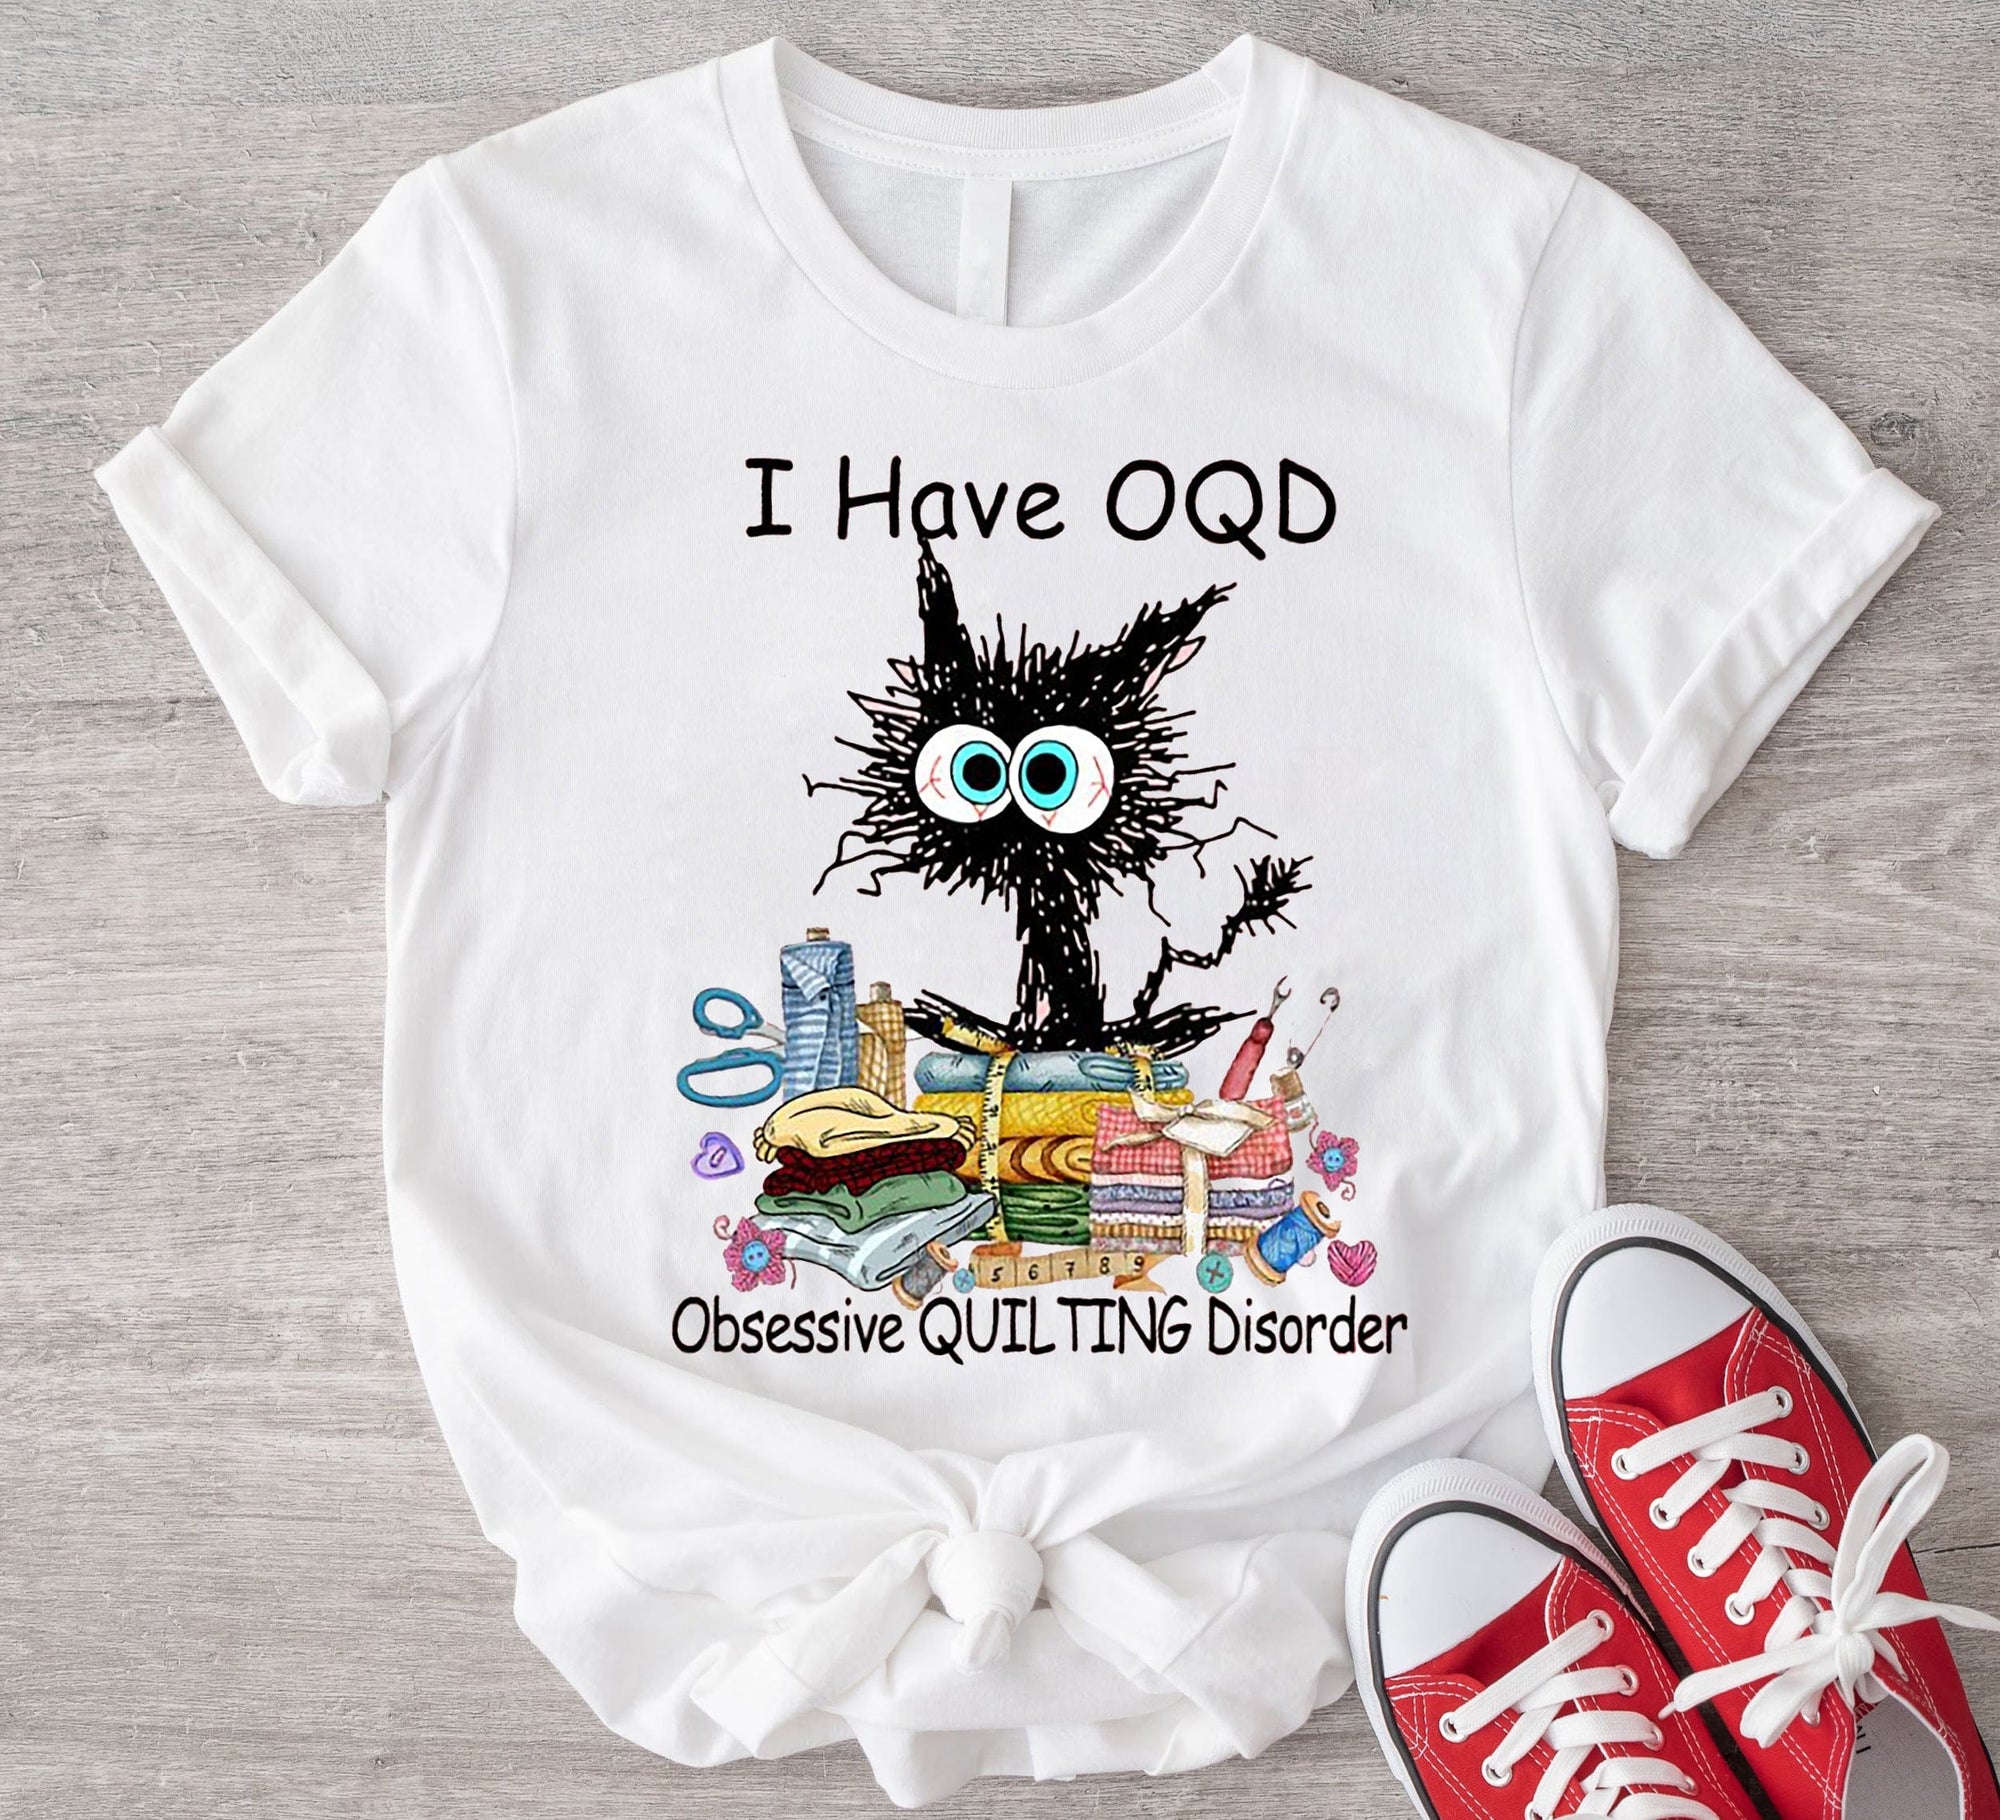 I Have OQD Obsessive Quilting Disorder Funny Cat And Quilting Shirt